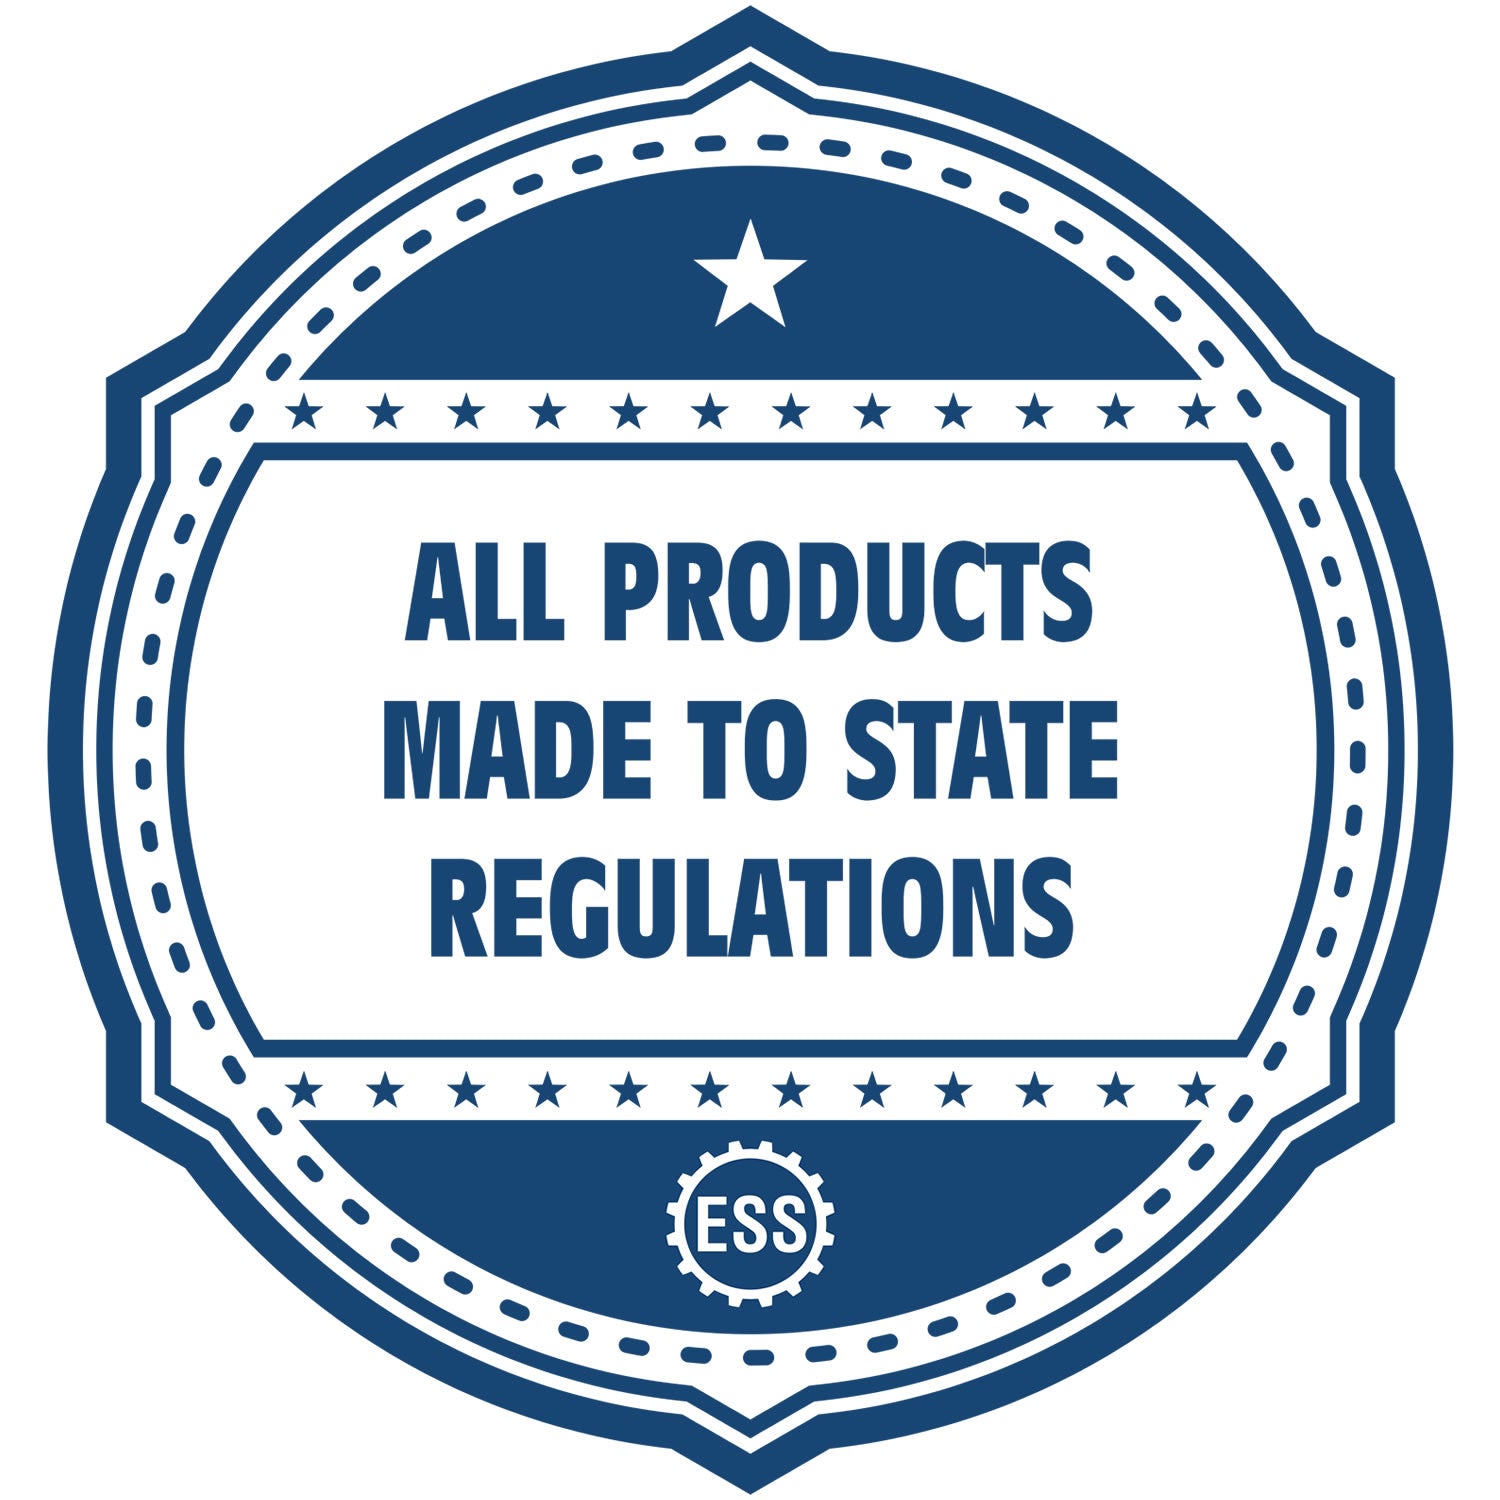 An icon or badge element for the Slim Pre-Inked Utah Architect Seal Stamp showing that this product is made in compliance with state regulations.